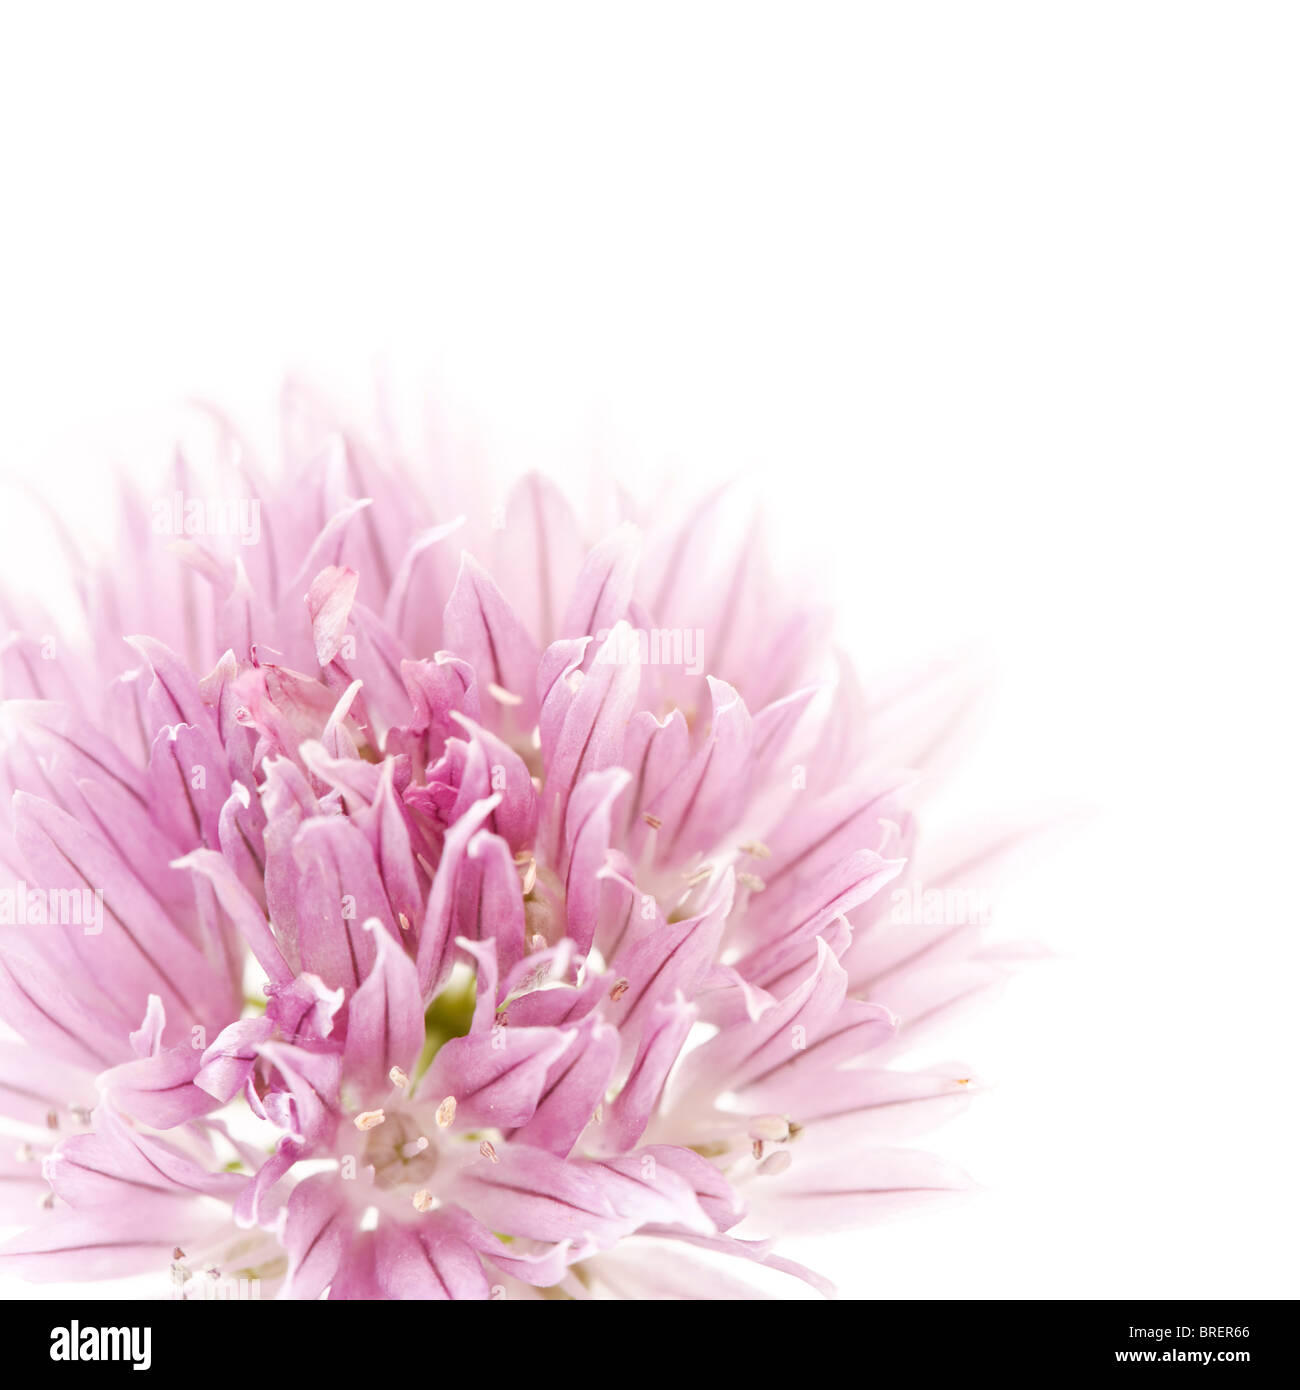 Closeup of a pink chives flower, ideal for illustrating concepts such as freshness and elegance Stock Photo